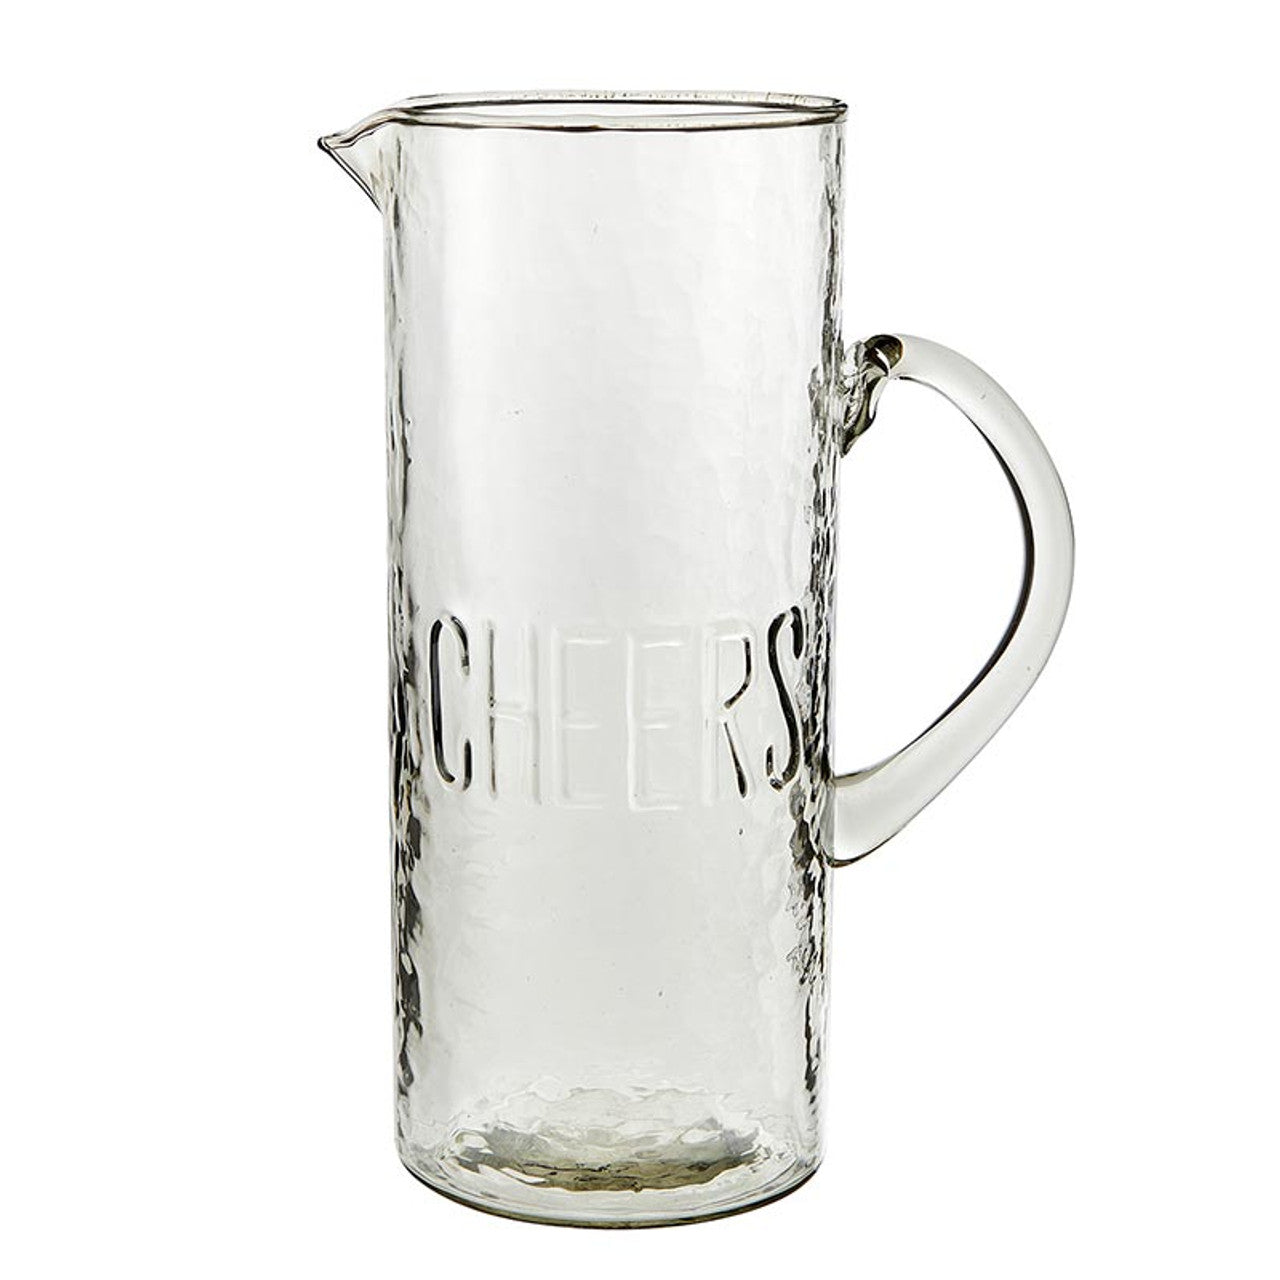 Cheers Glass Pitcher